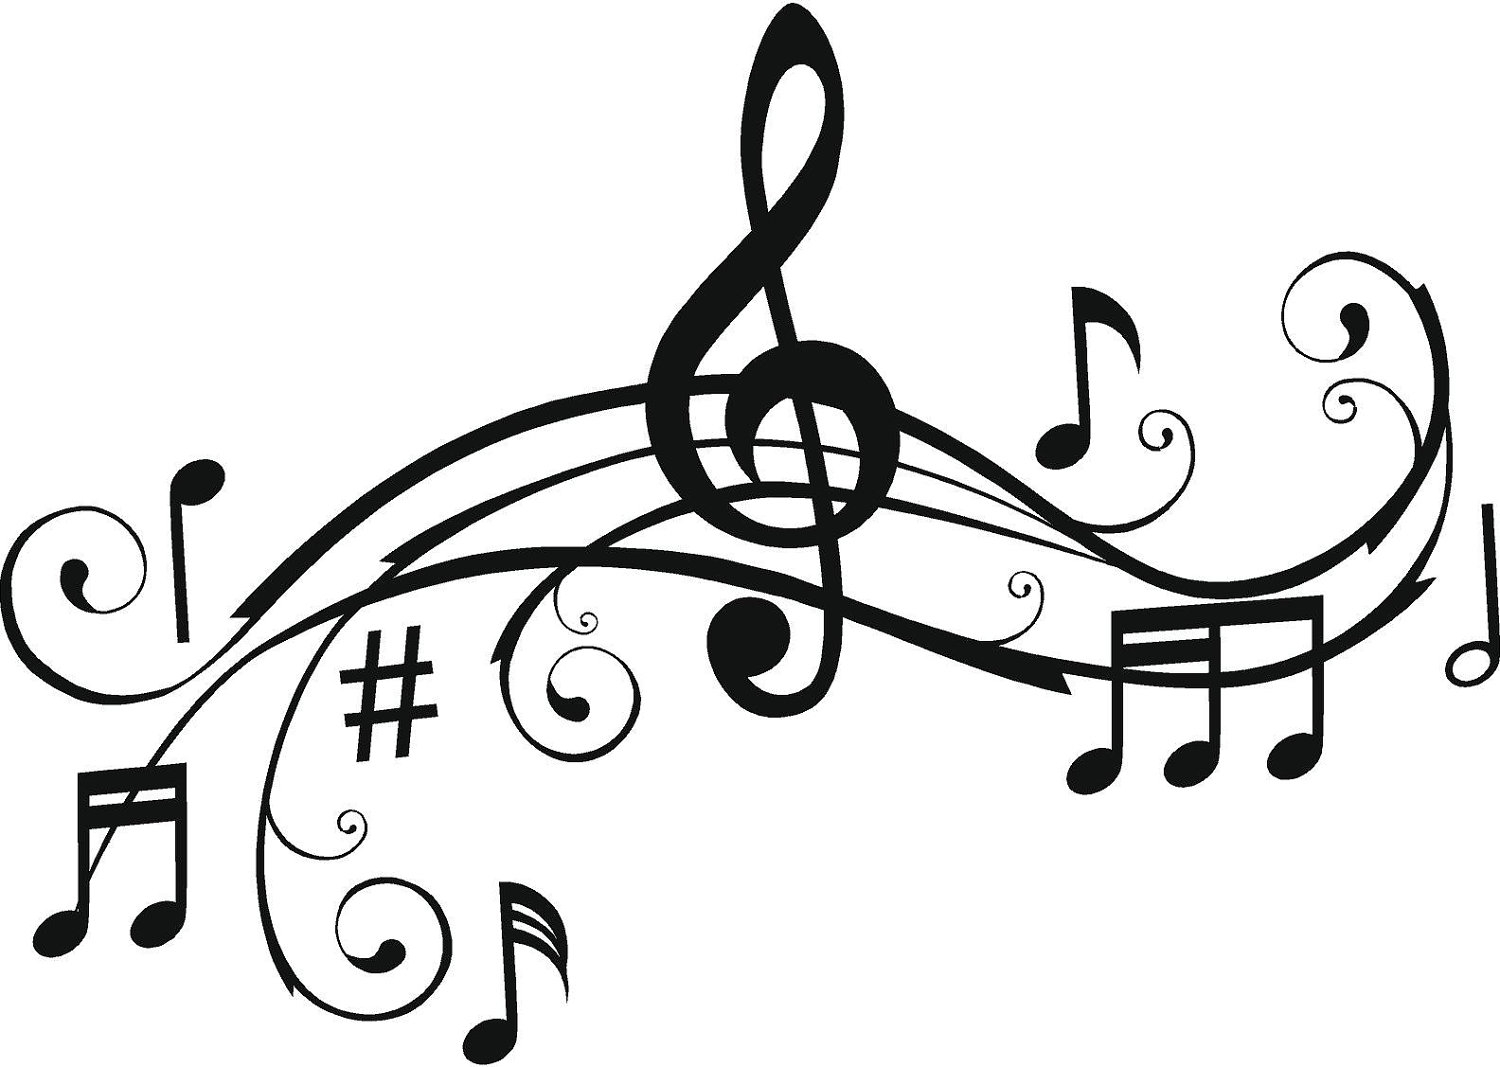 Music notes  black and white music notes clipart black and white synkee 2